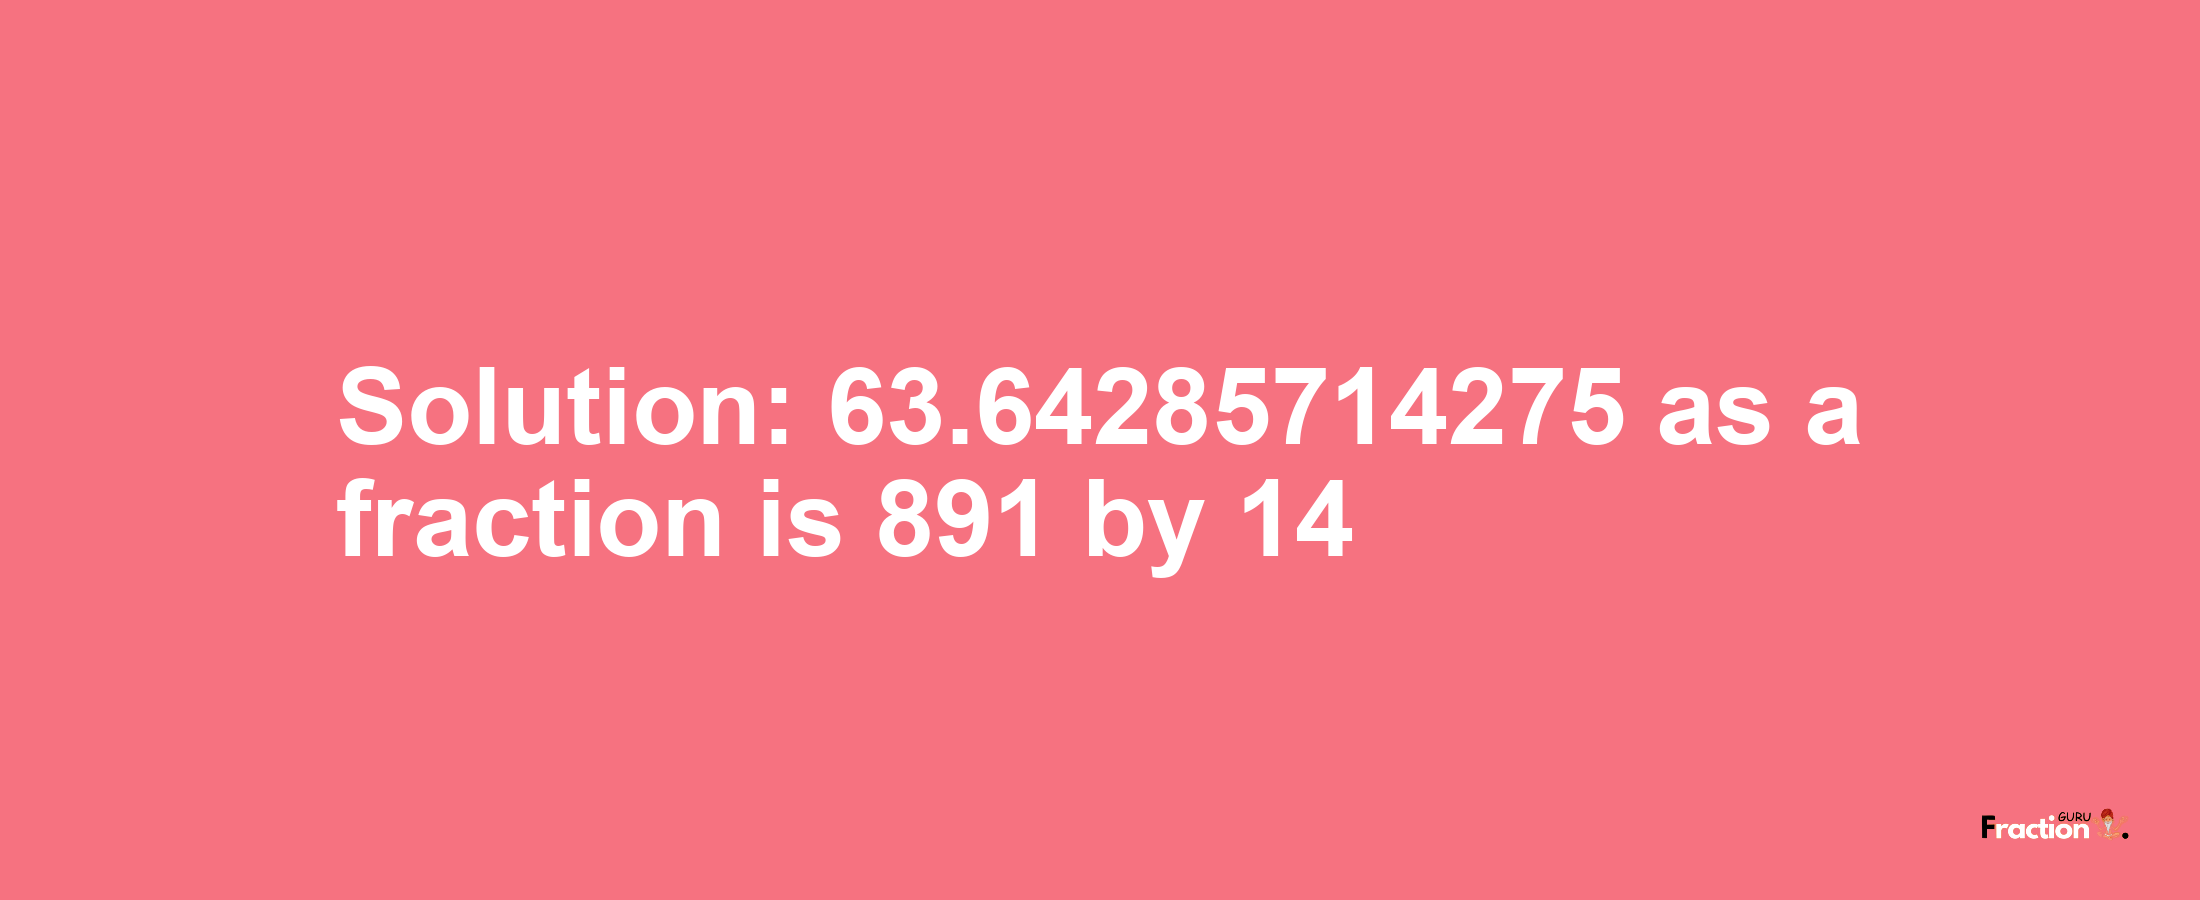 Solution:63.64285714275 as a fraction is 891/14